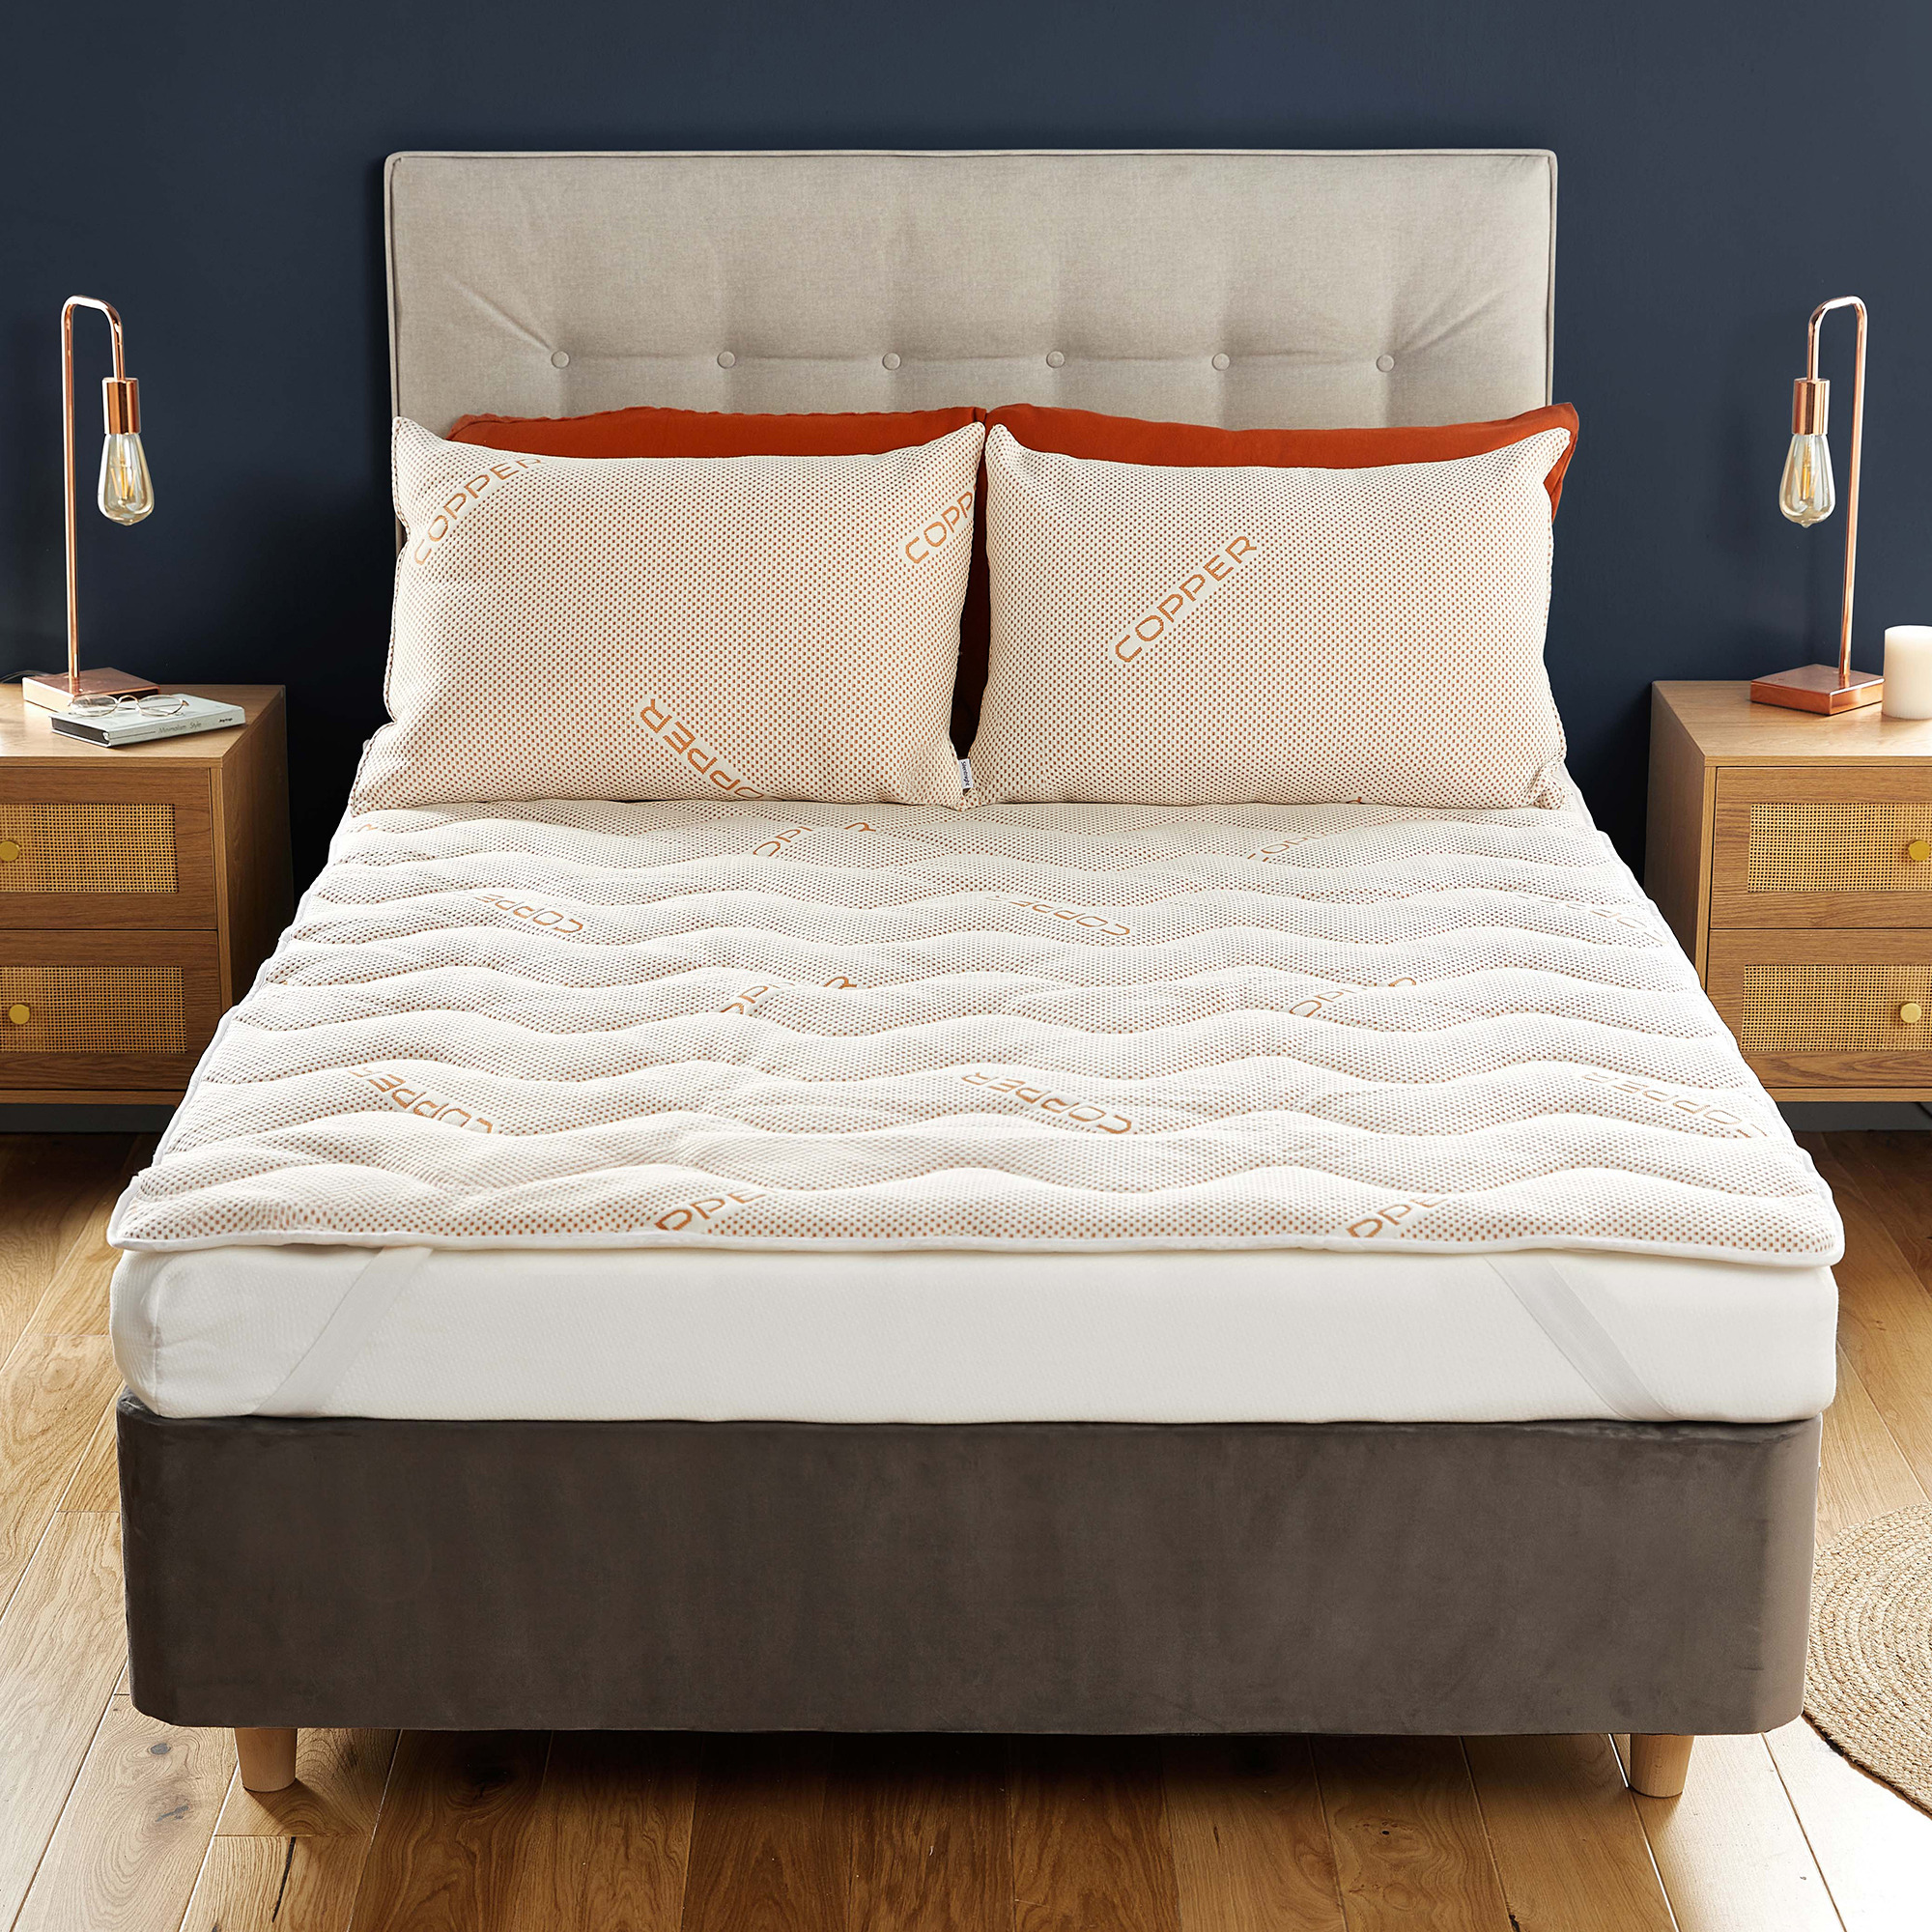 Silentnight Wellbeing Collection Copper Infused Mattress Topper